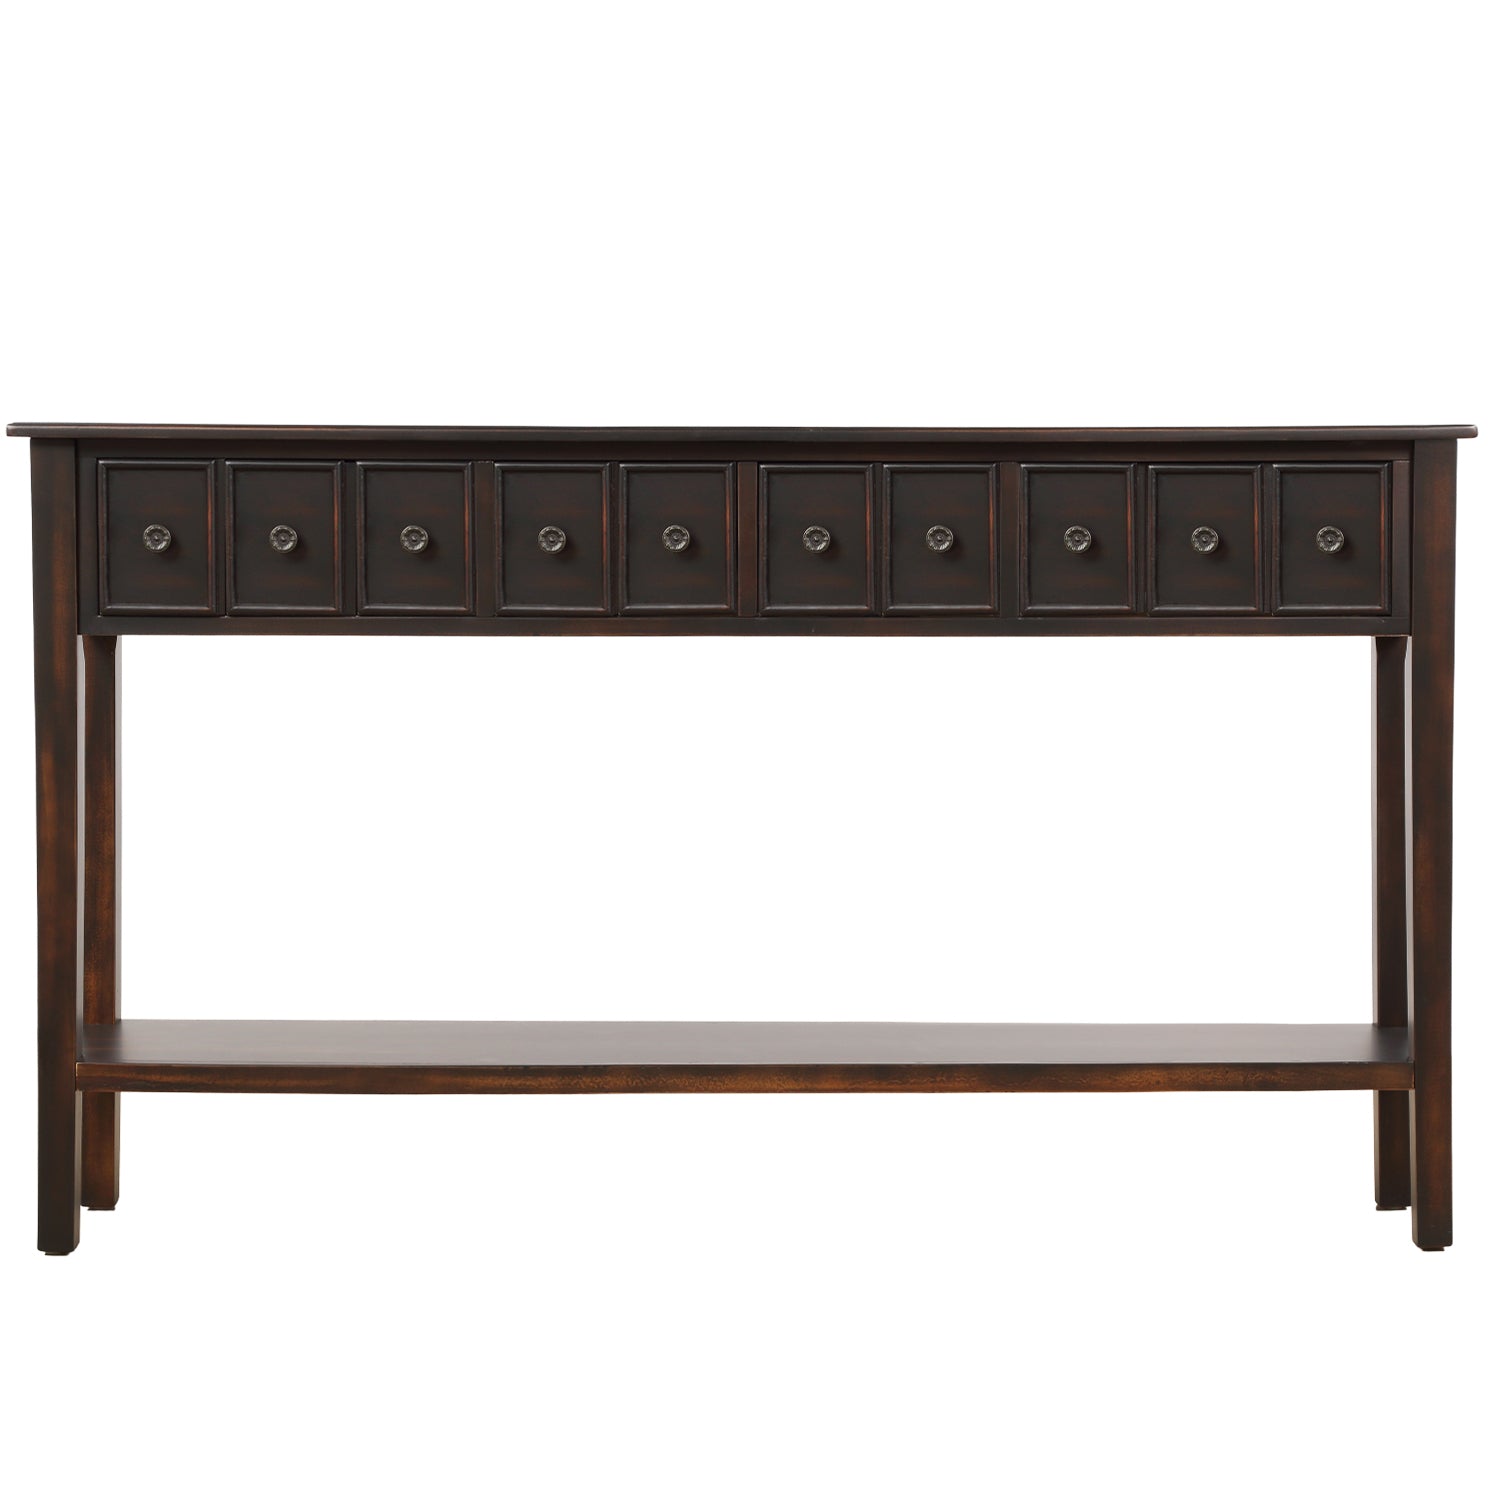 Rustic Entryway Console Table, 60" Long Sofa Table with two Different Size Drawers and Bottom Shelf for Storage-Boyel Living